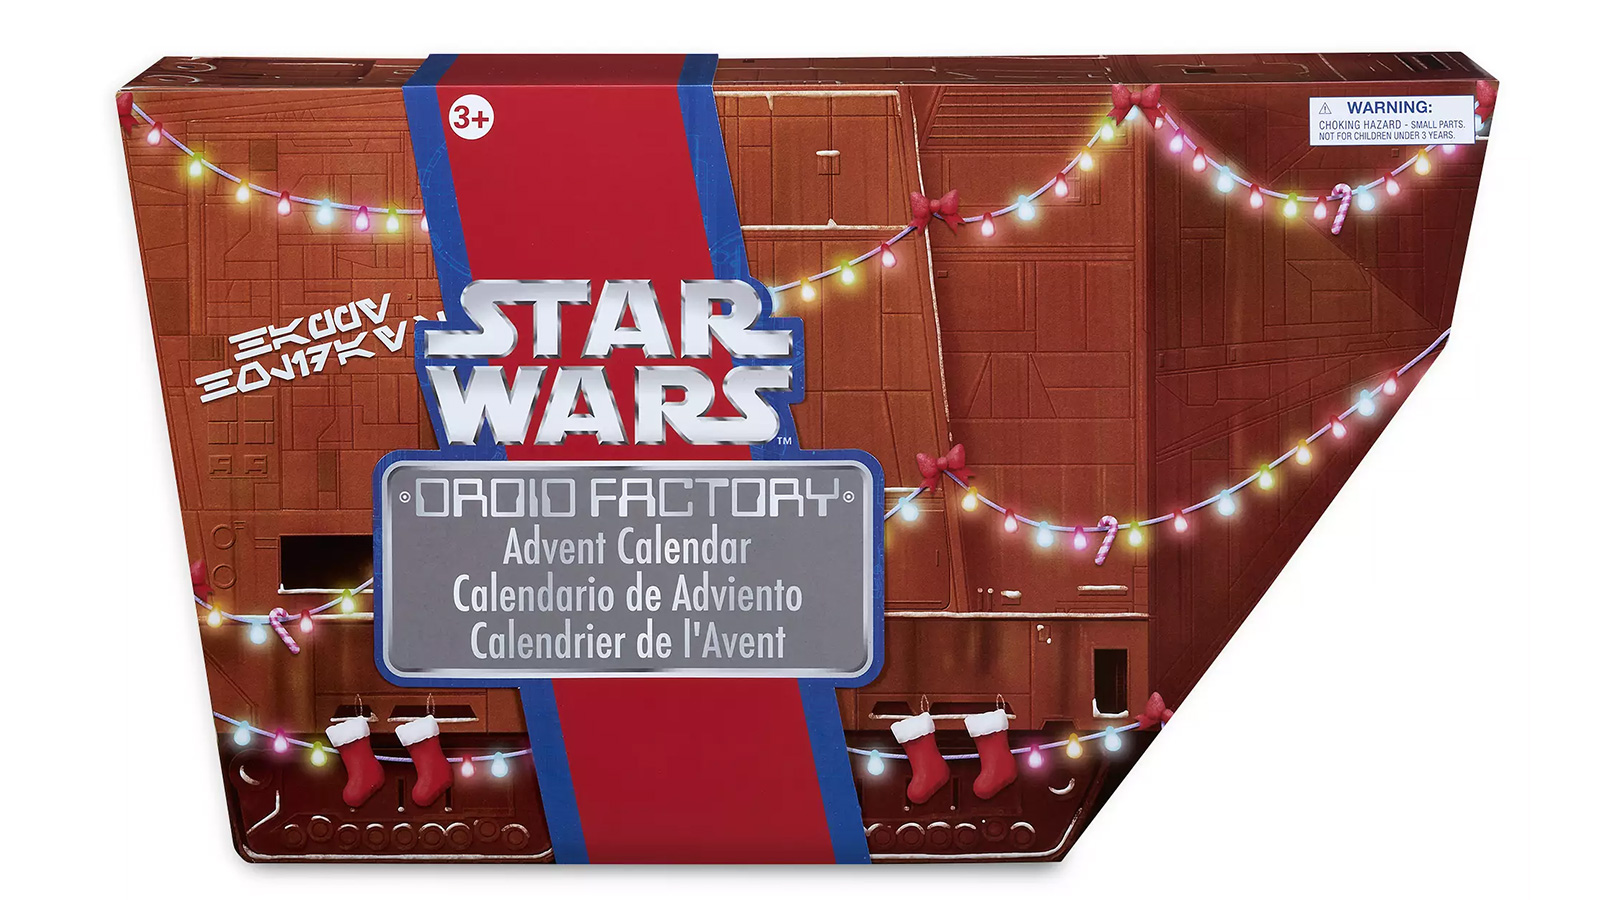 In Stock At Shop Disney Re Released Droid Factory Advent Calendar